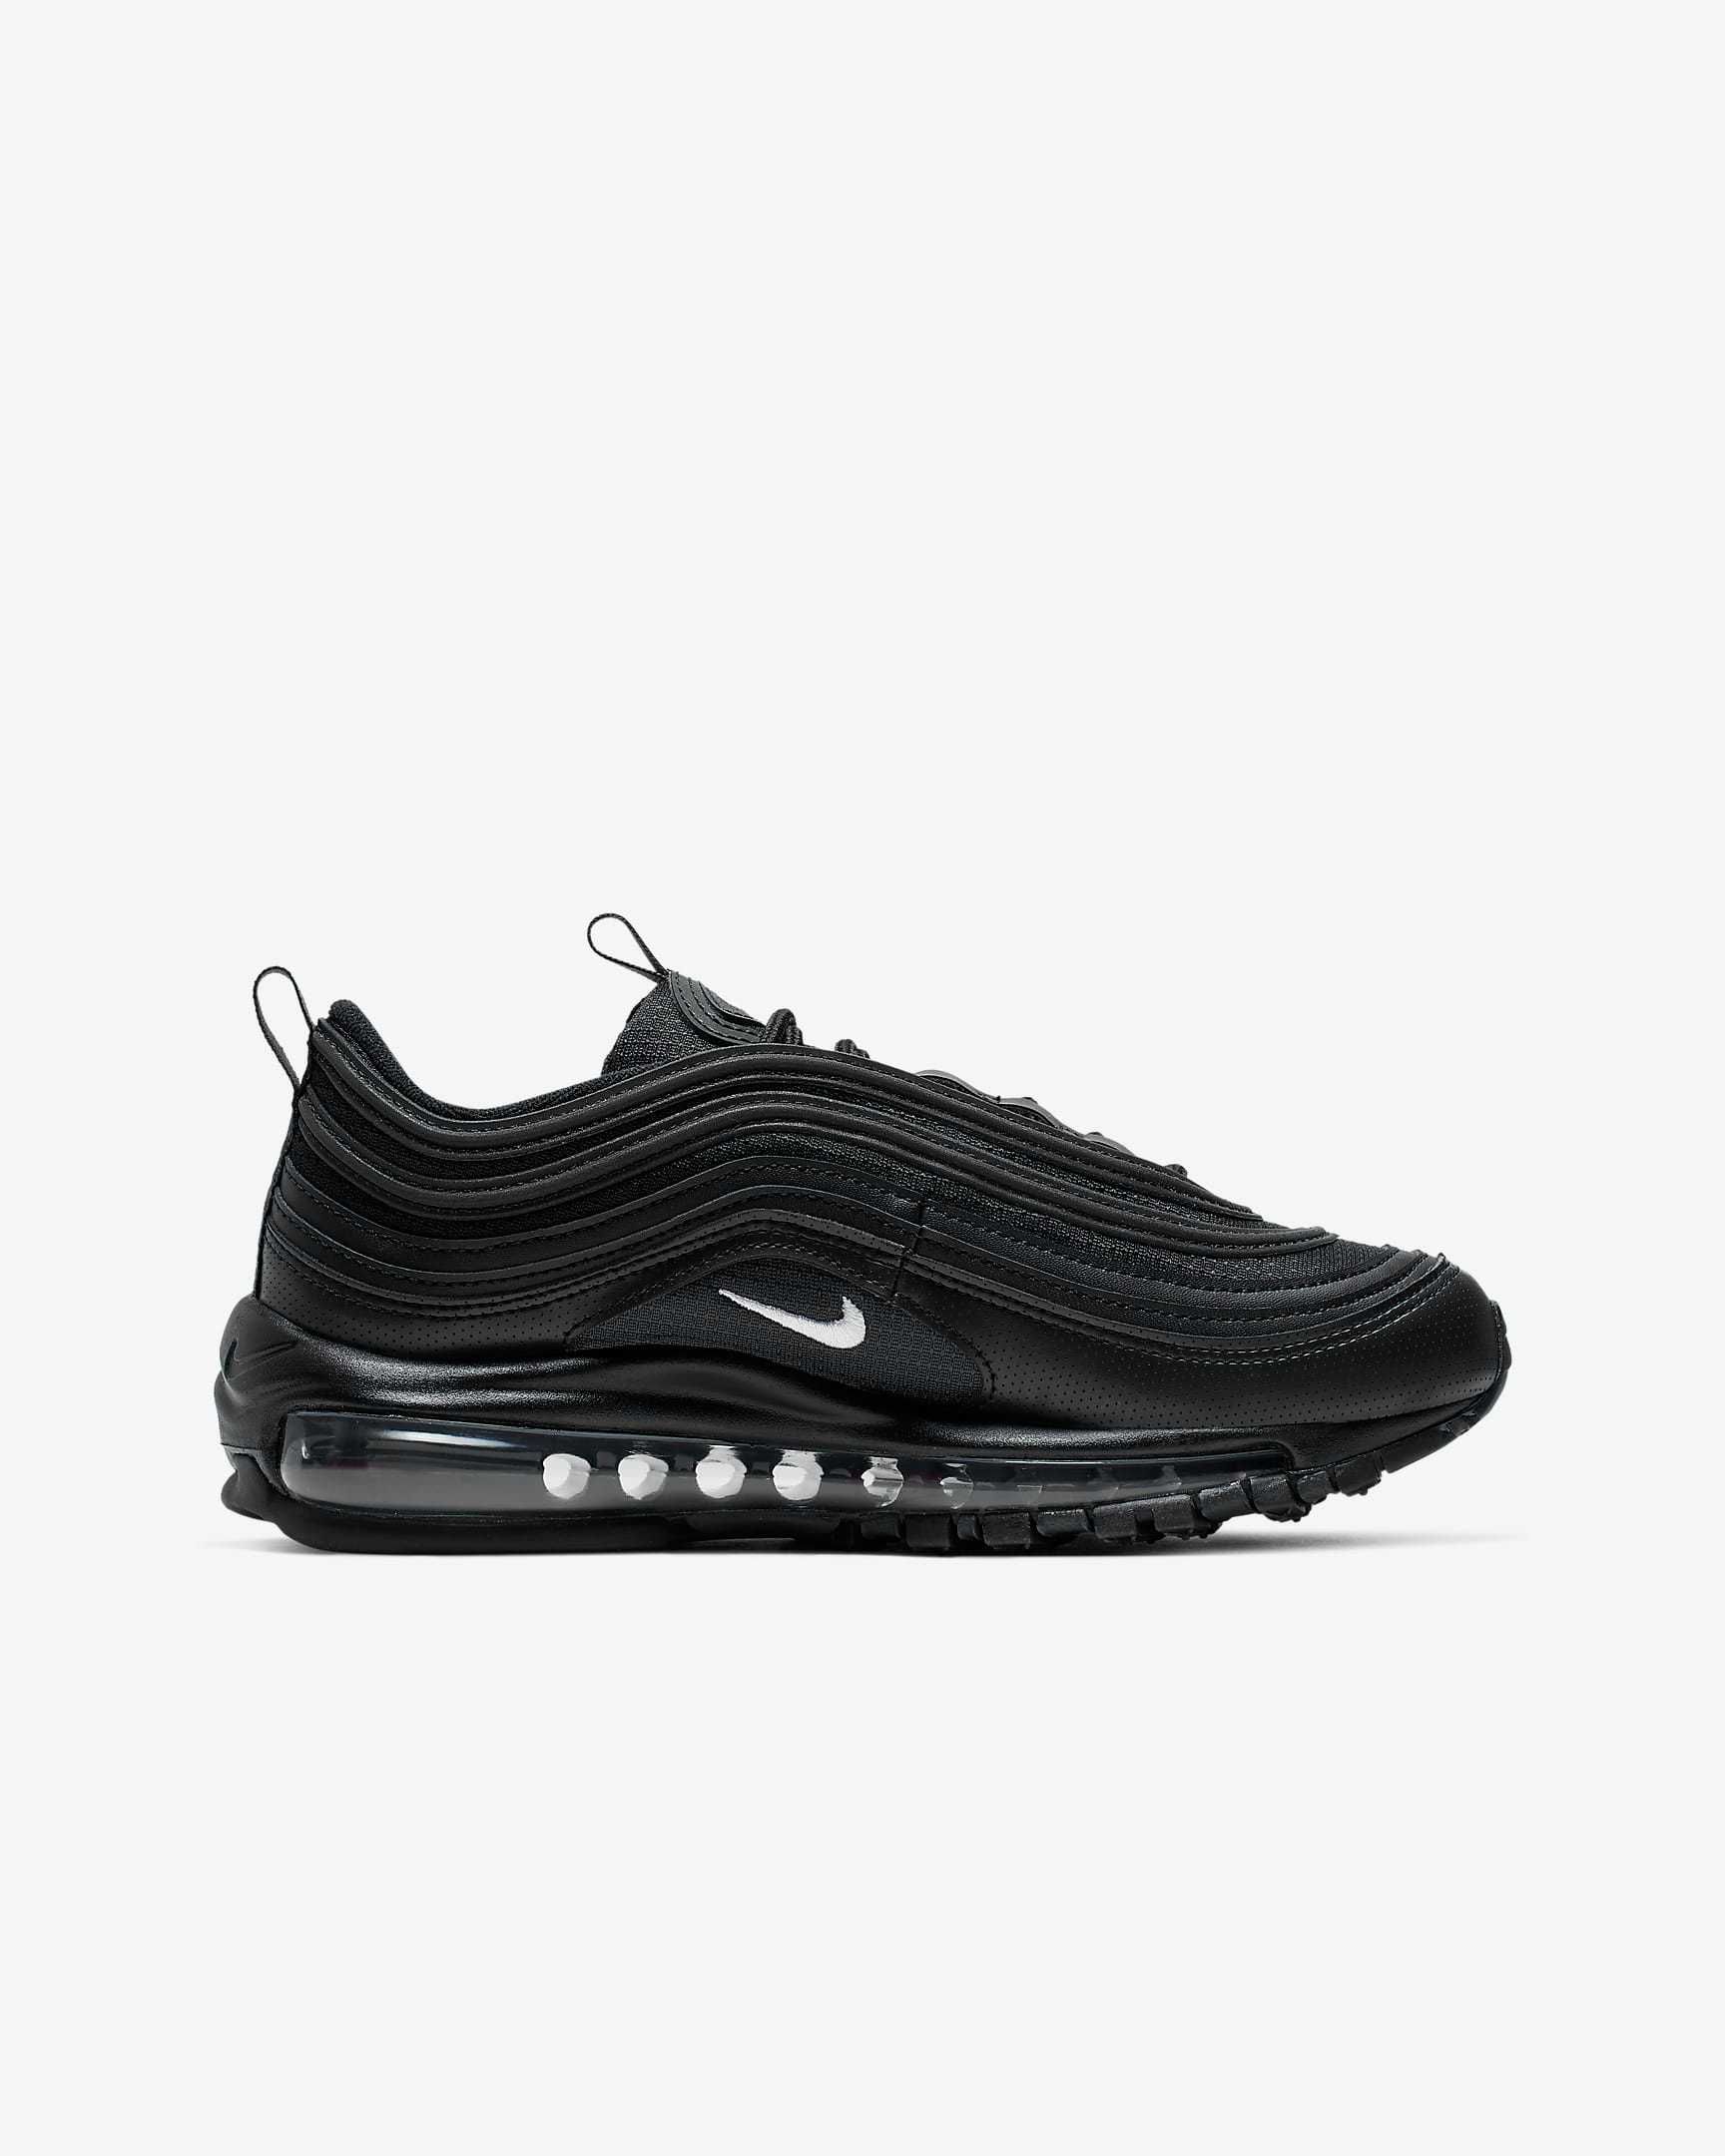 Nike Air Max 97 Black / Outlet